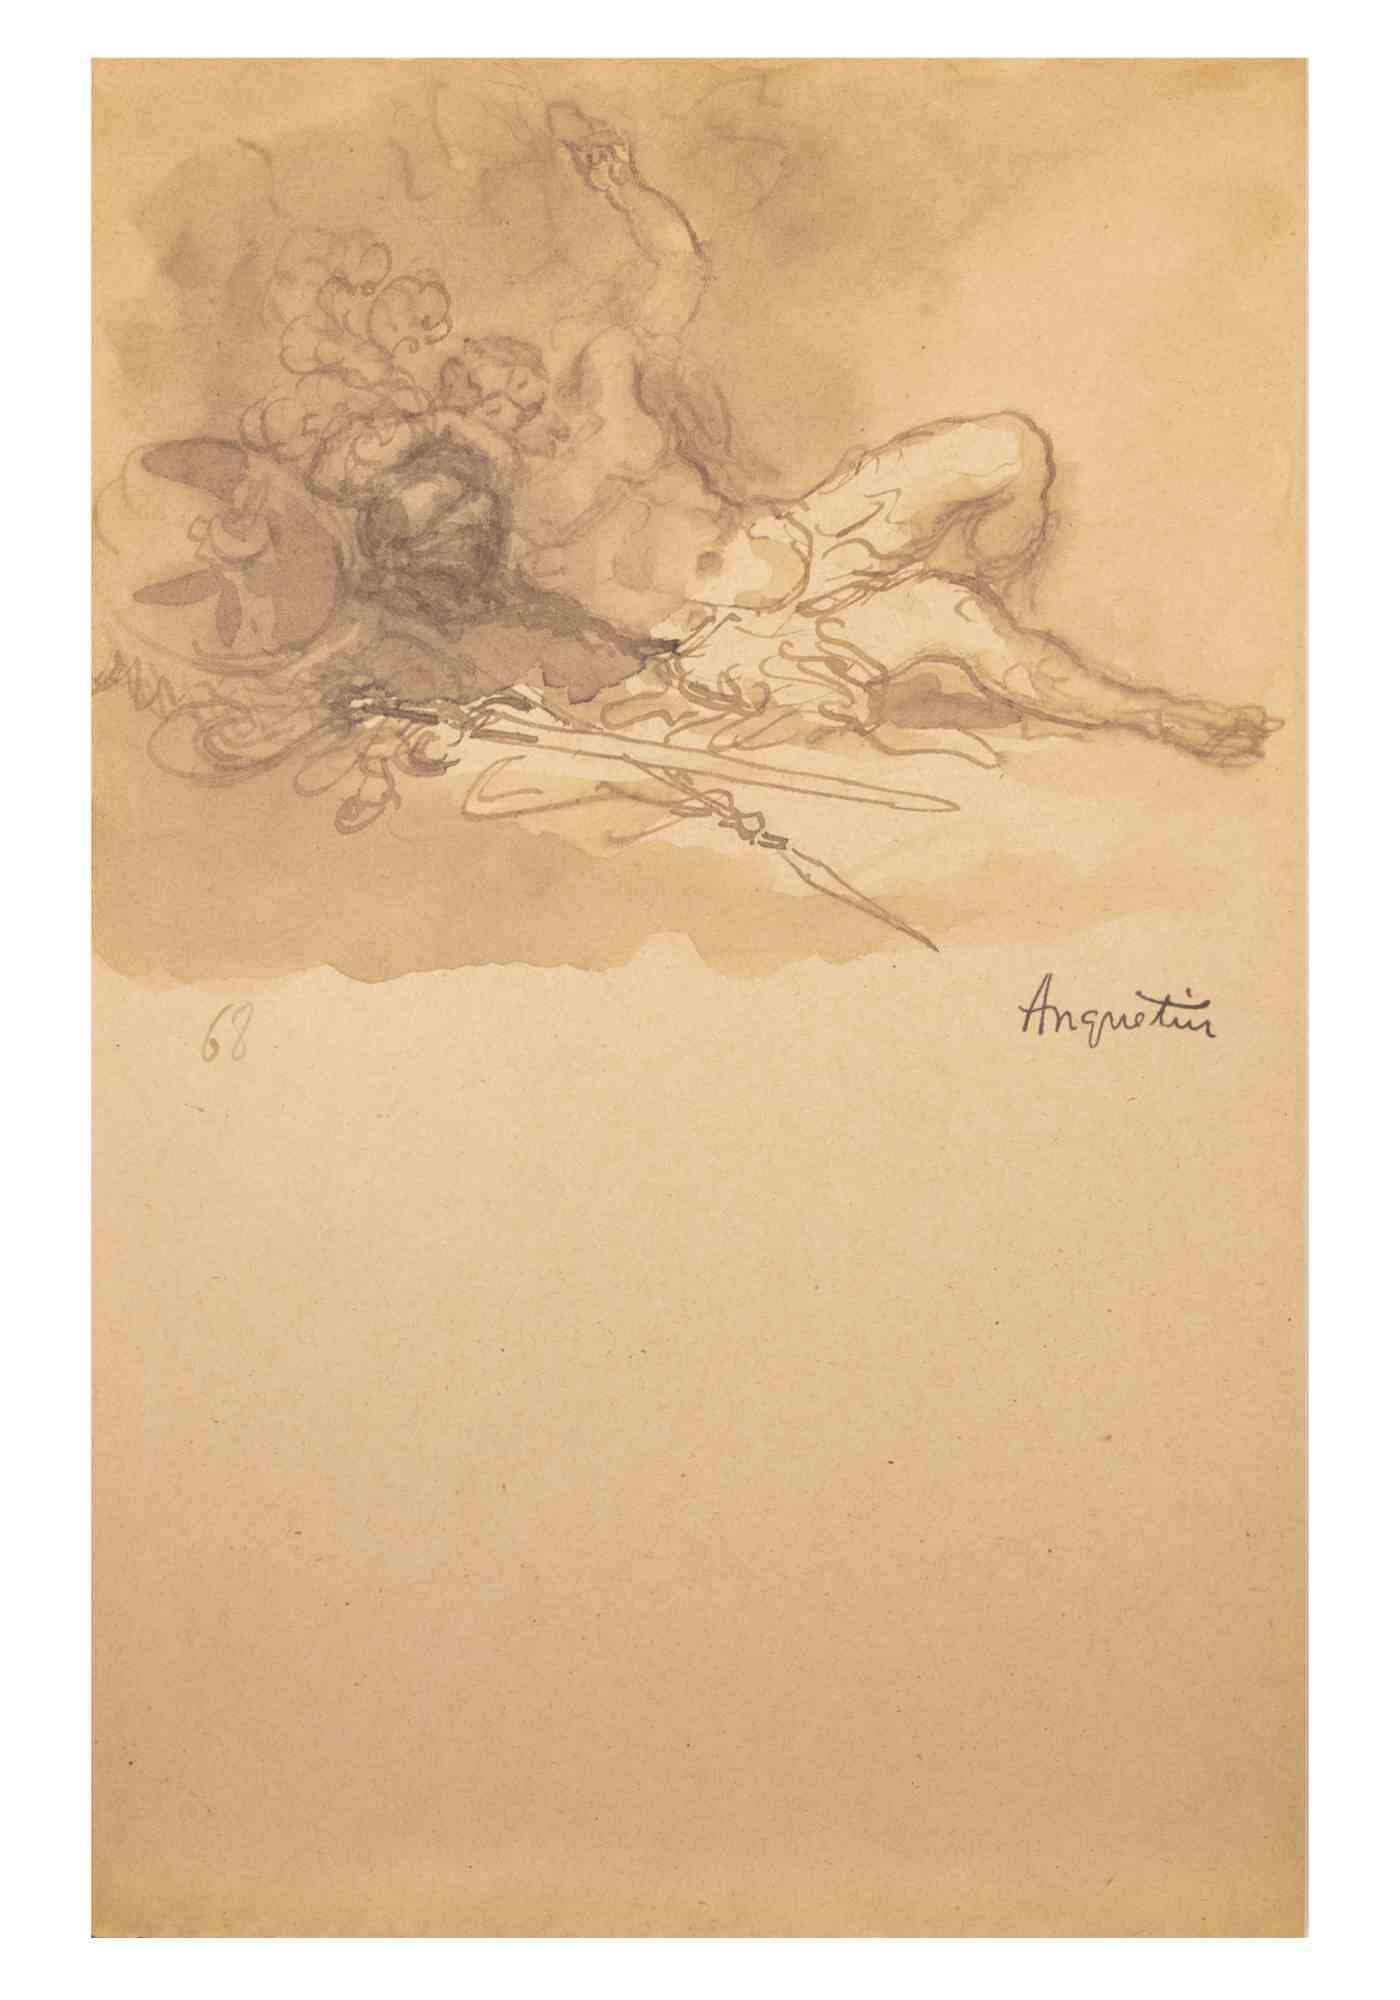 Nude is an ink drawing on paper realized in the early 20th Century by Louis Anquetin (1861-1932).

Hand-signed on the lower.

Good condition.

Louis Émile Anquetin (26 January 1861 – 19 August 1932) was a French painter. In 1882 he came to Paris and